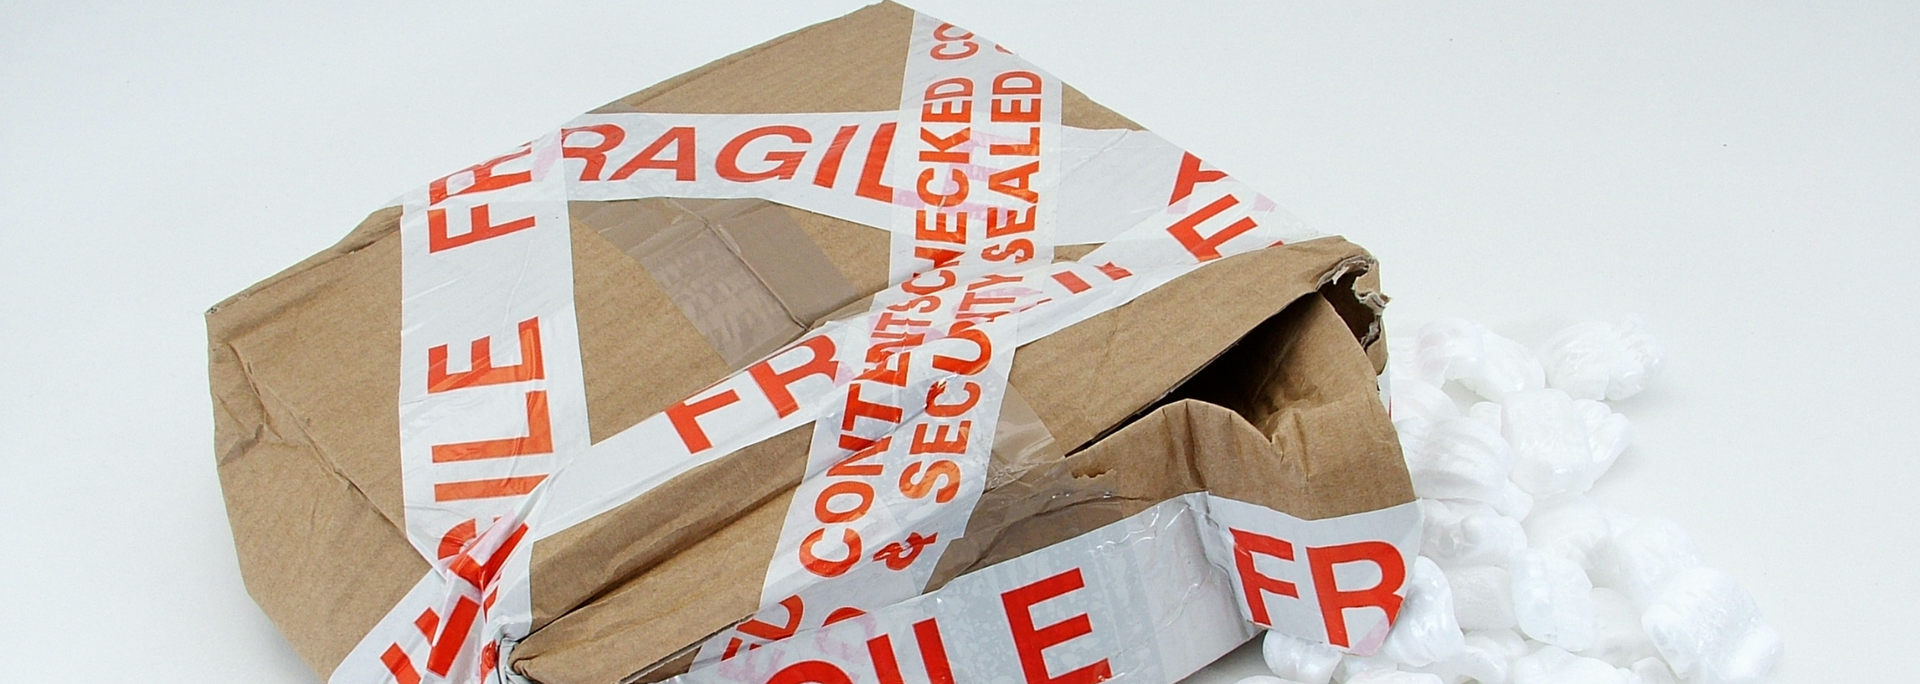 Picture of a damaged parcel.